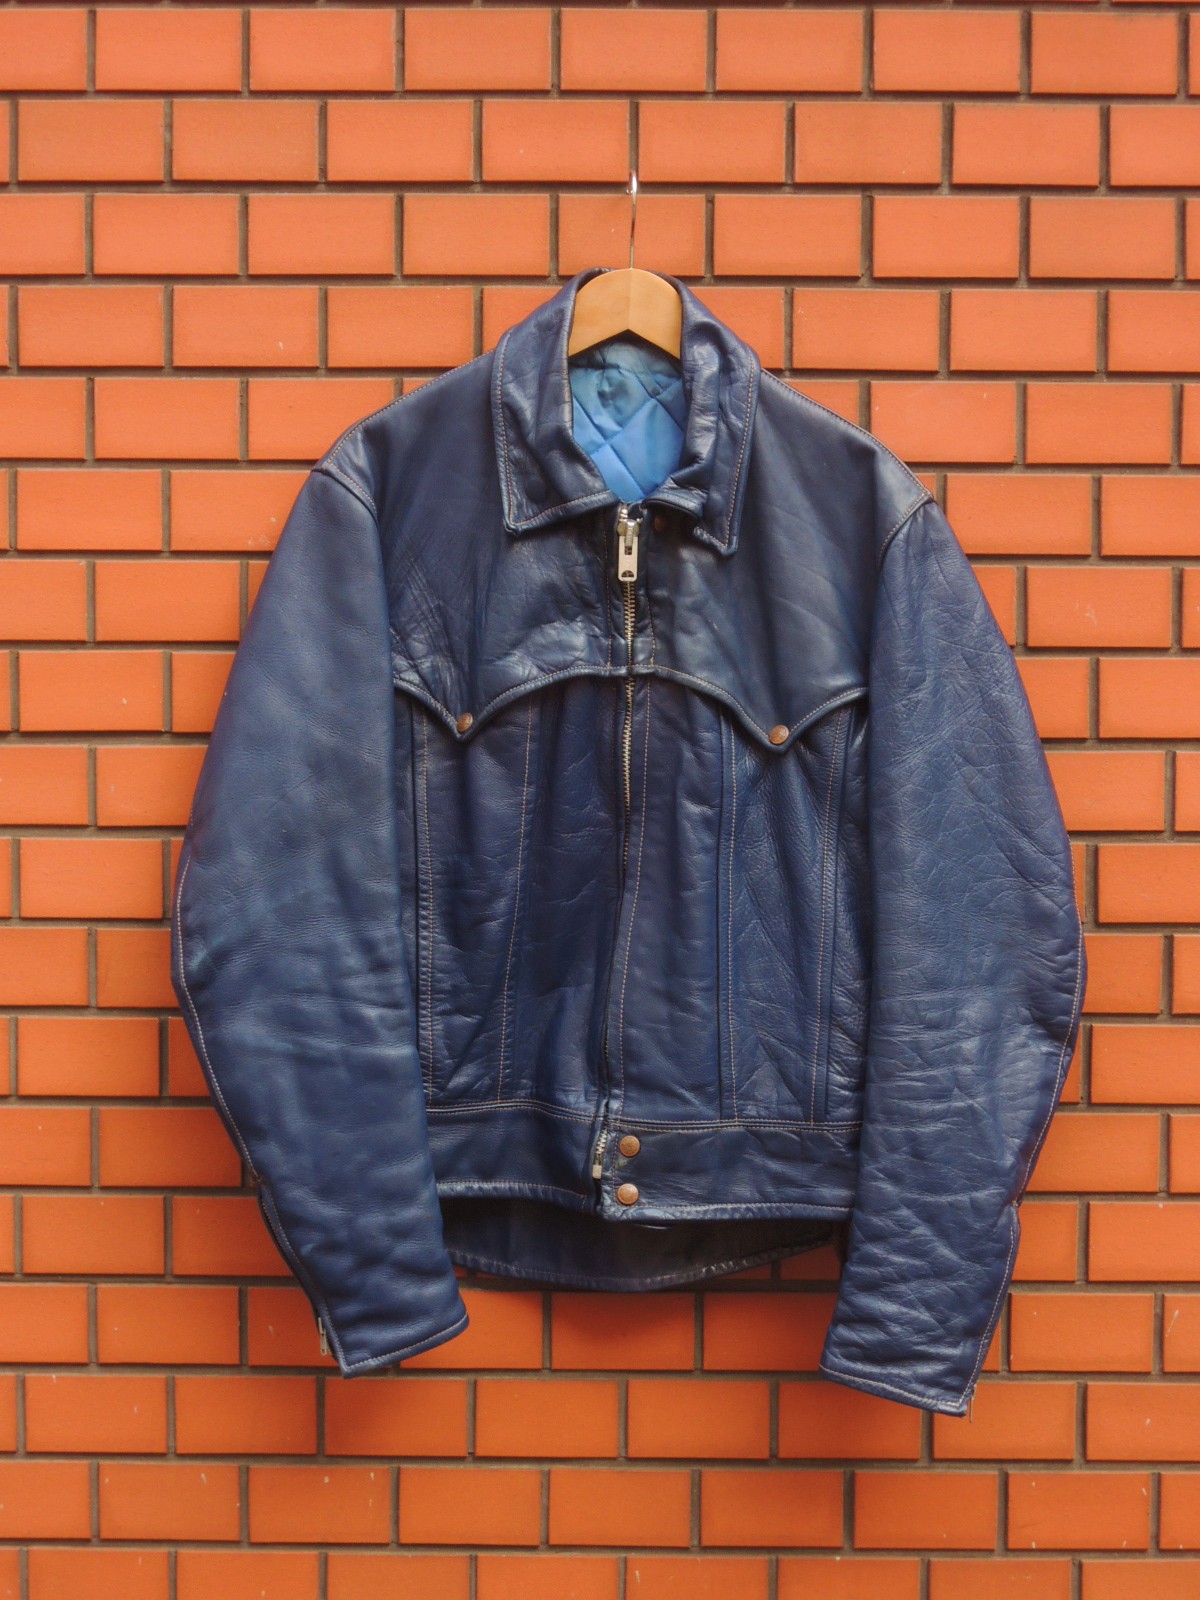 APPAREL ANNEX blue leather jacket: container